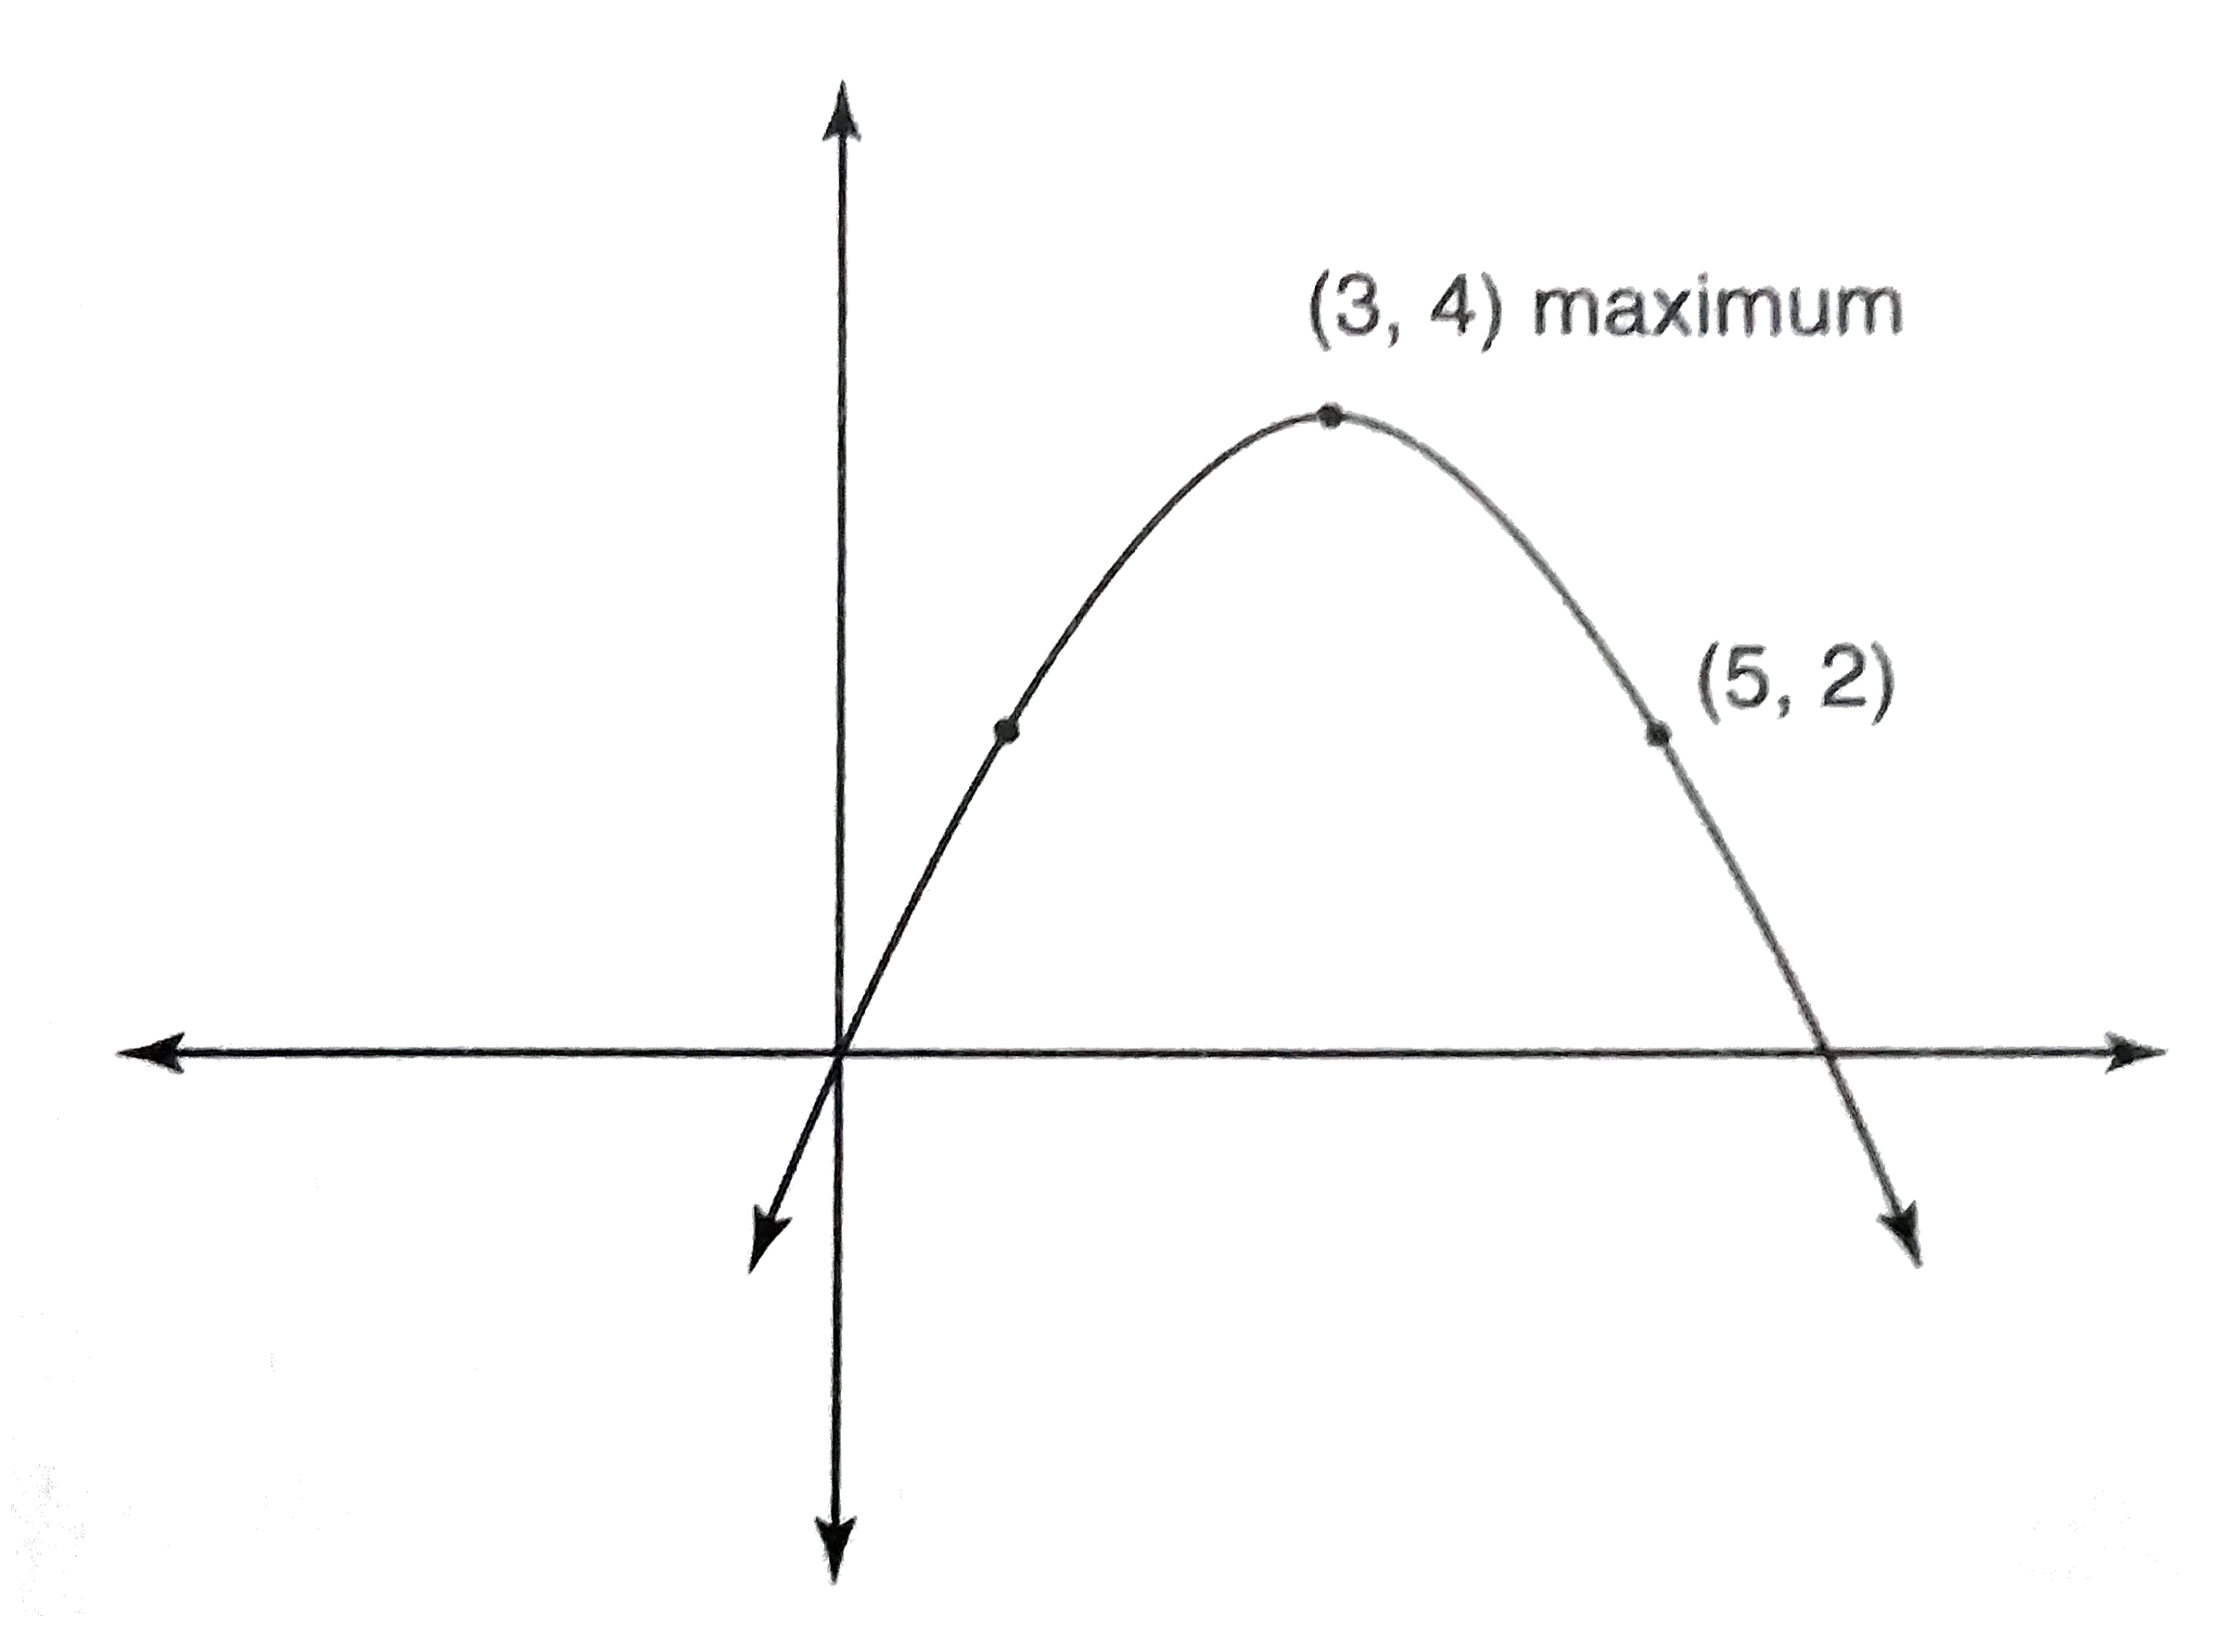 Find the equation of a parabola with maximum at (3,4) that goes through (5,2)